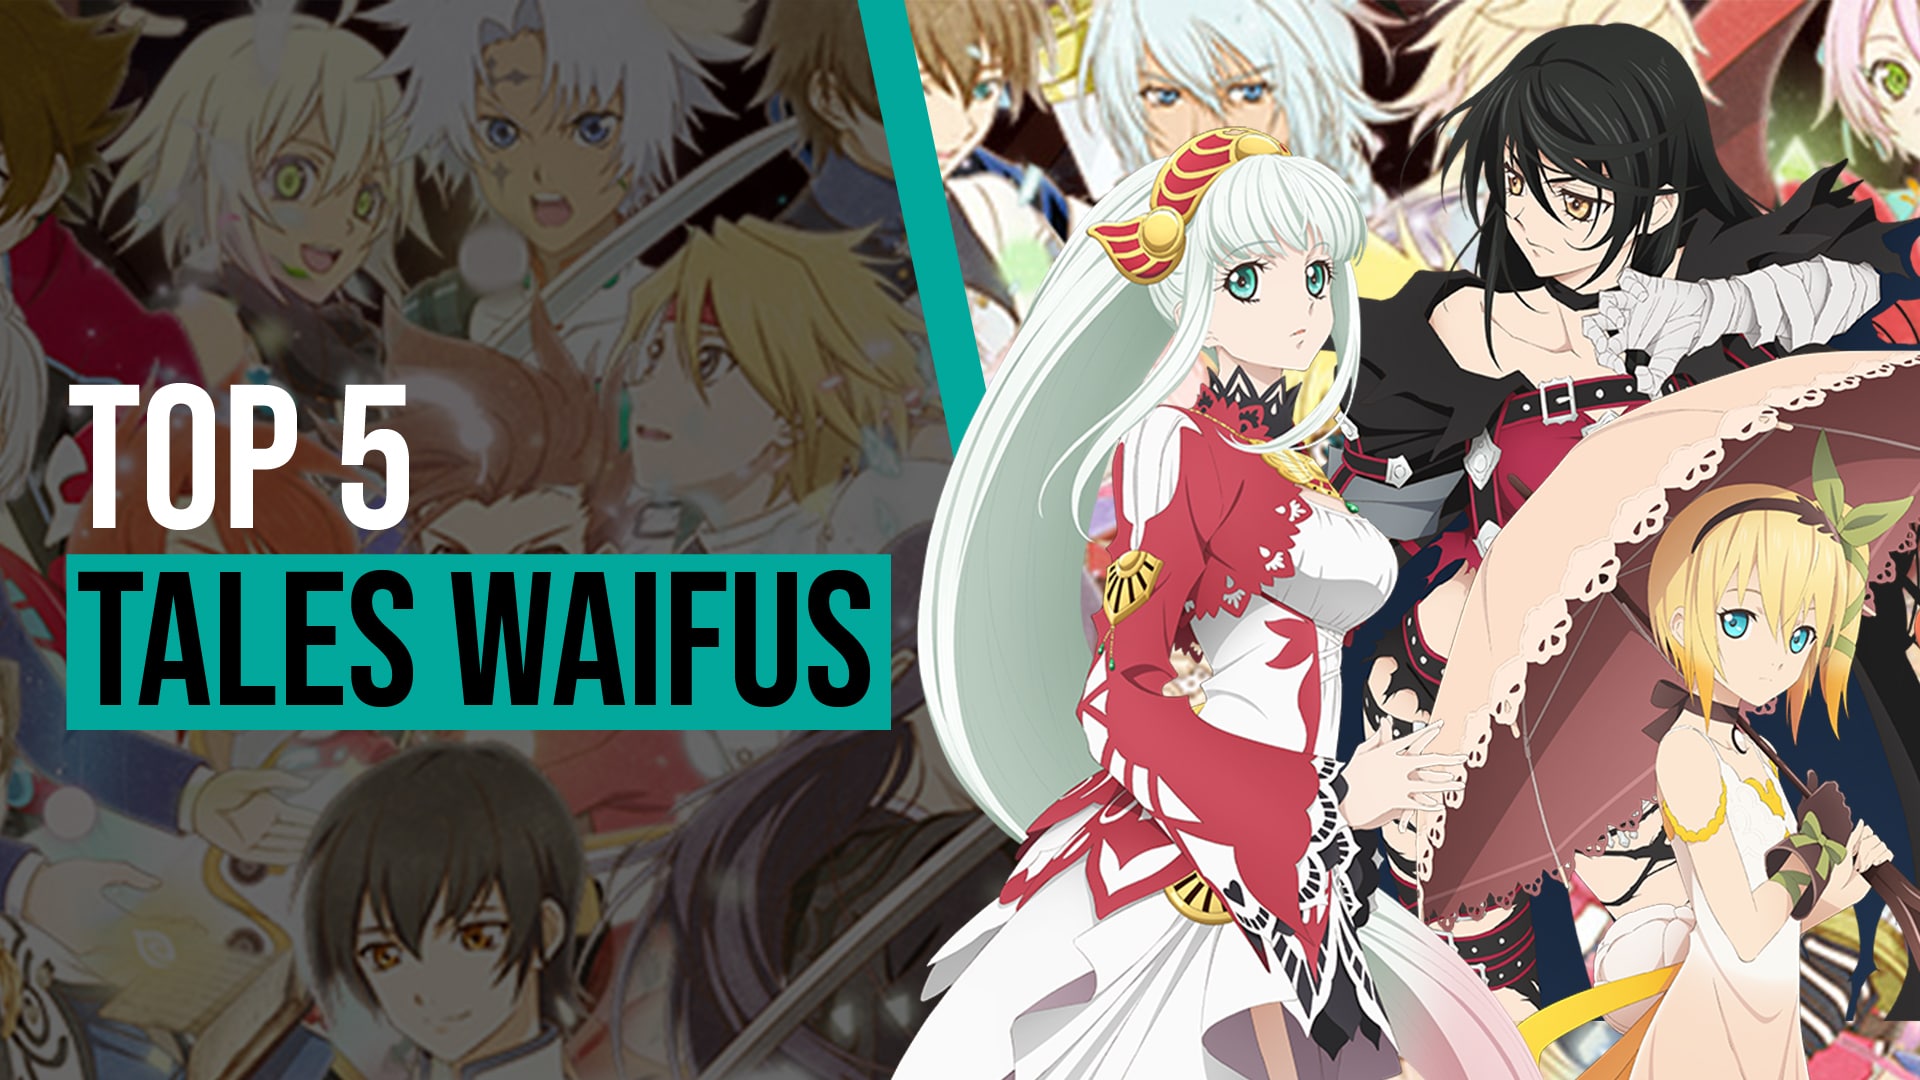 Top 5 Tales Waifus – A Series That Continues to Deliver